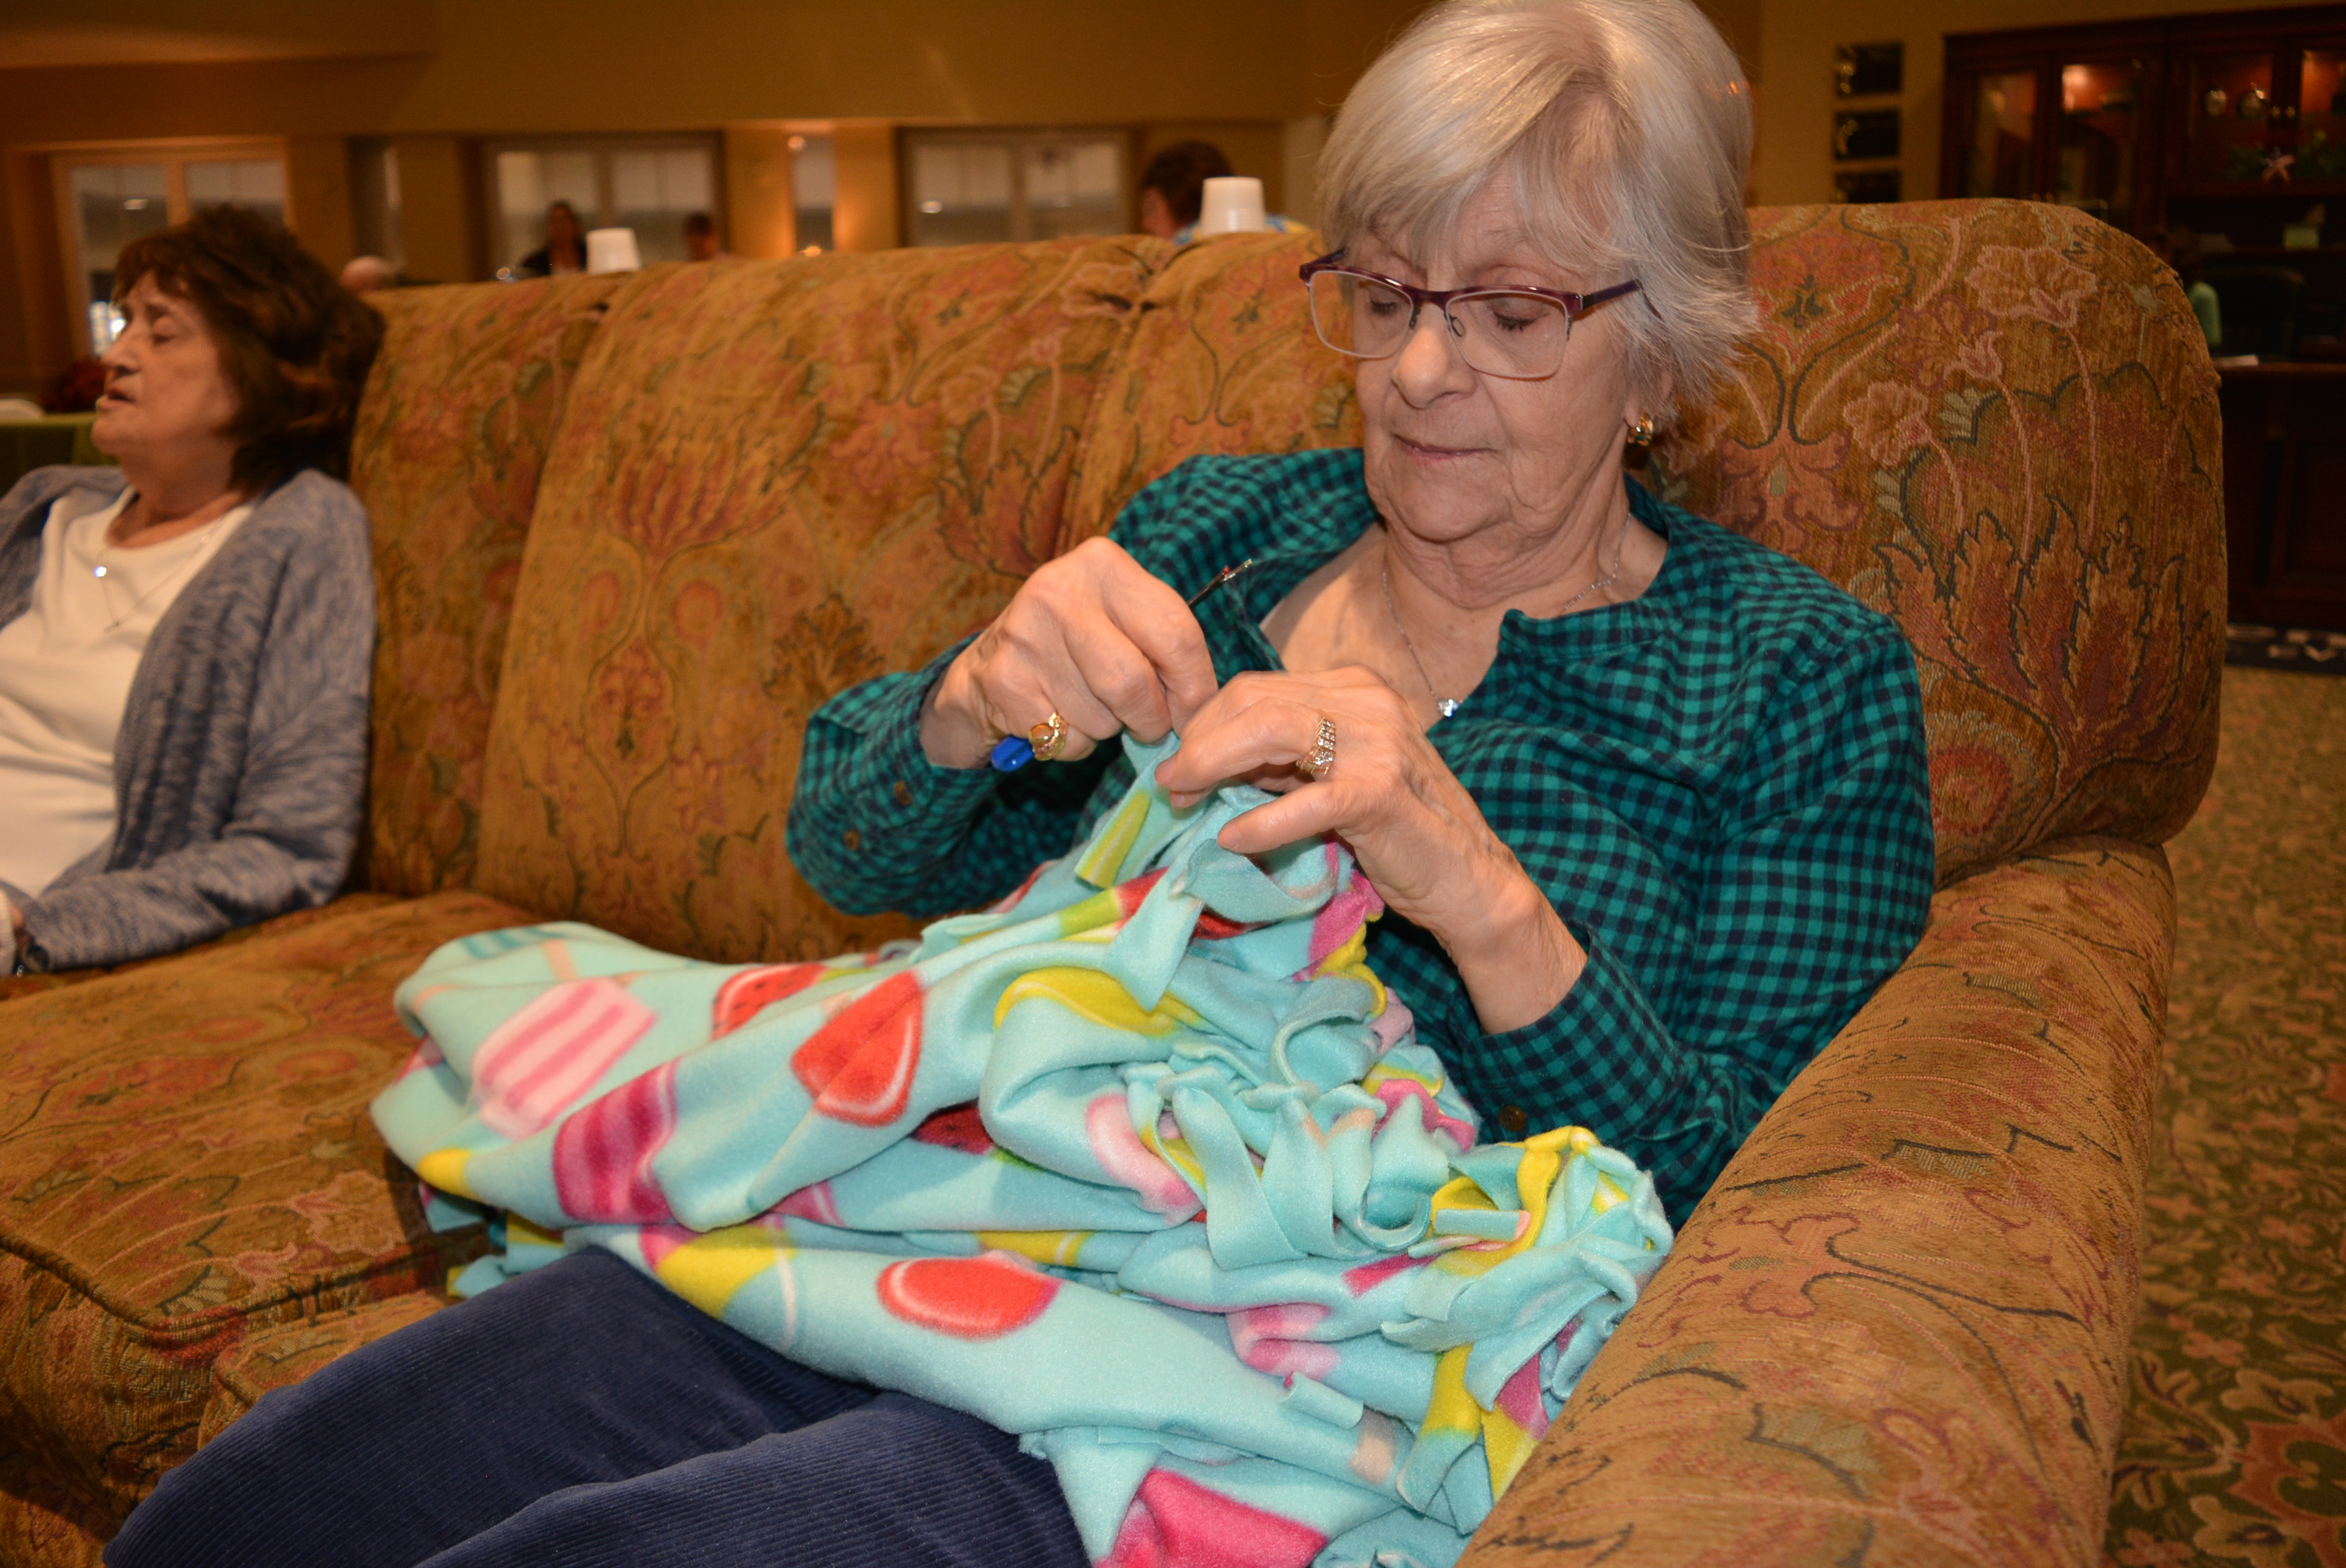 Catherine Nanney puts the finishing touches on a blanket. Photo by C.J. Carnacchio.